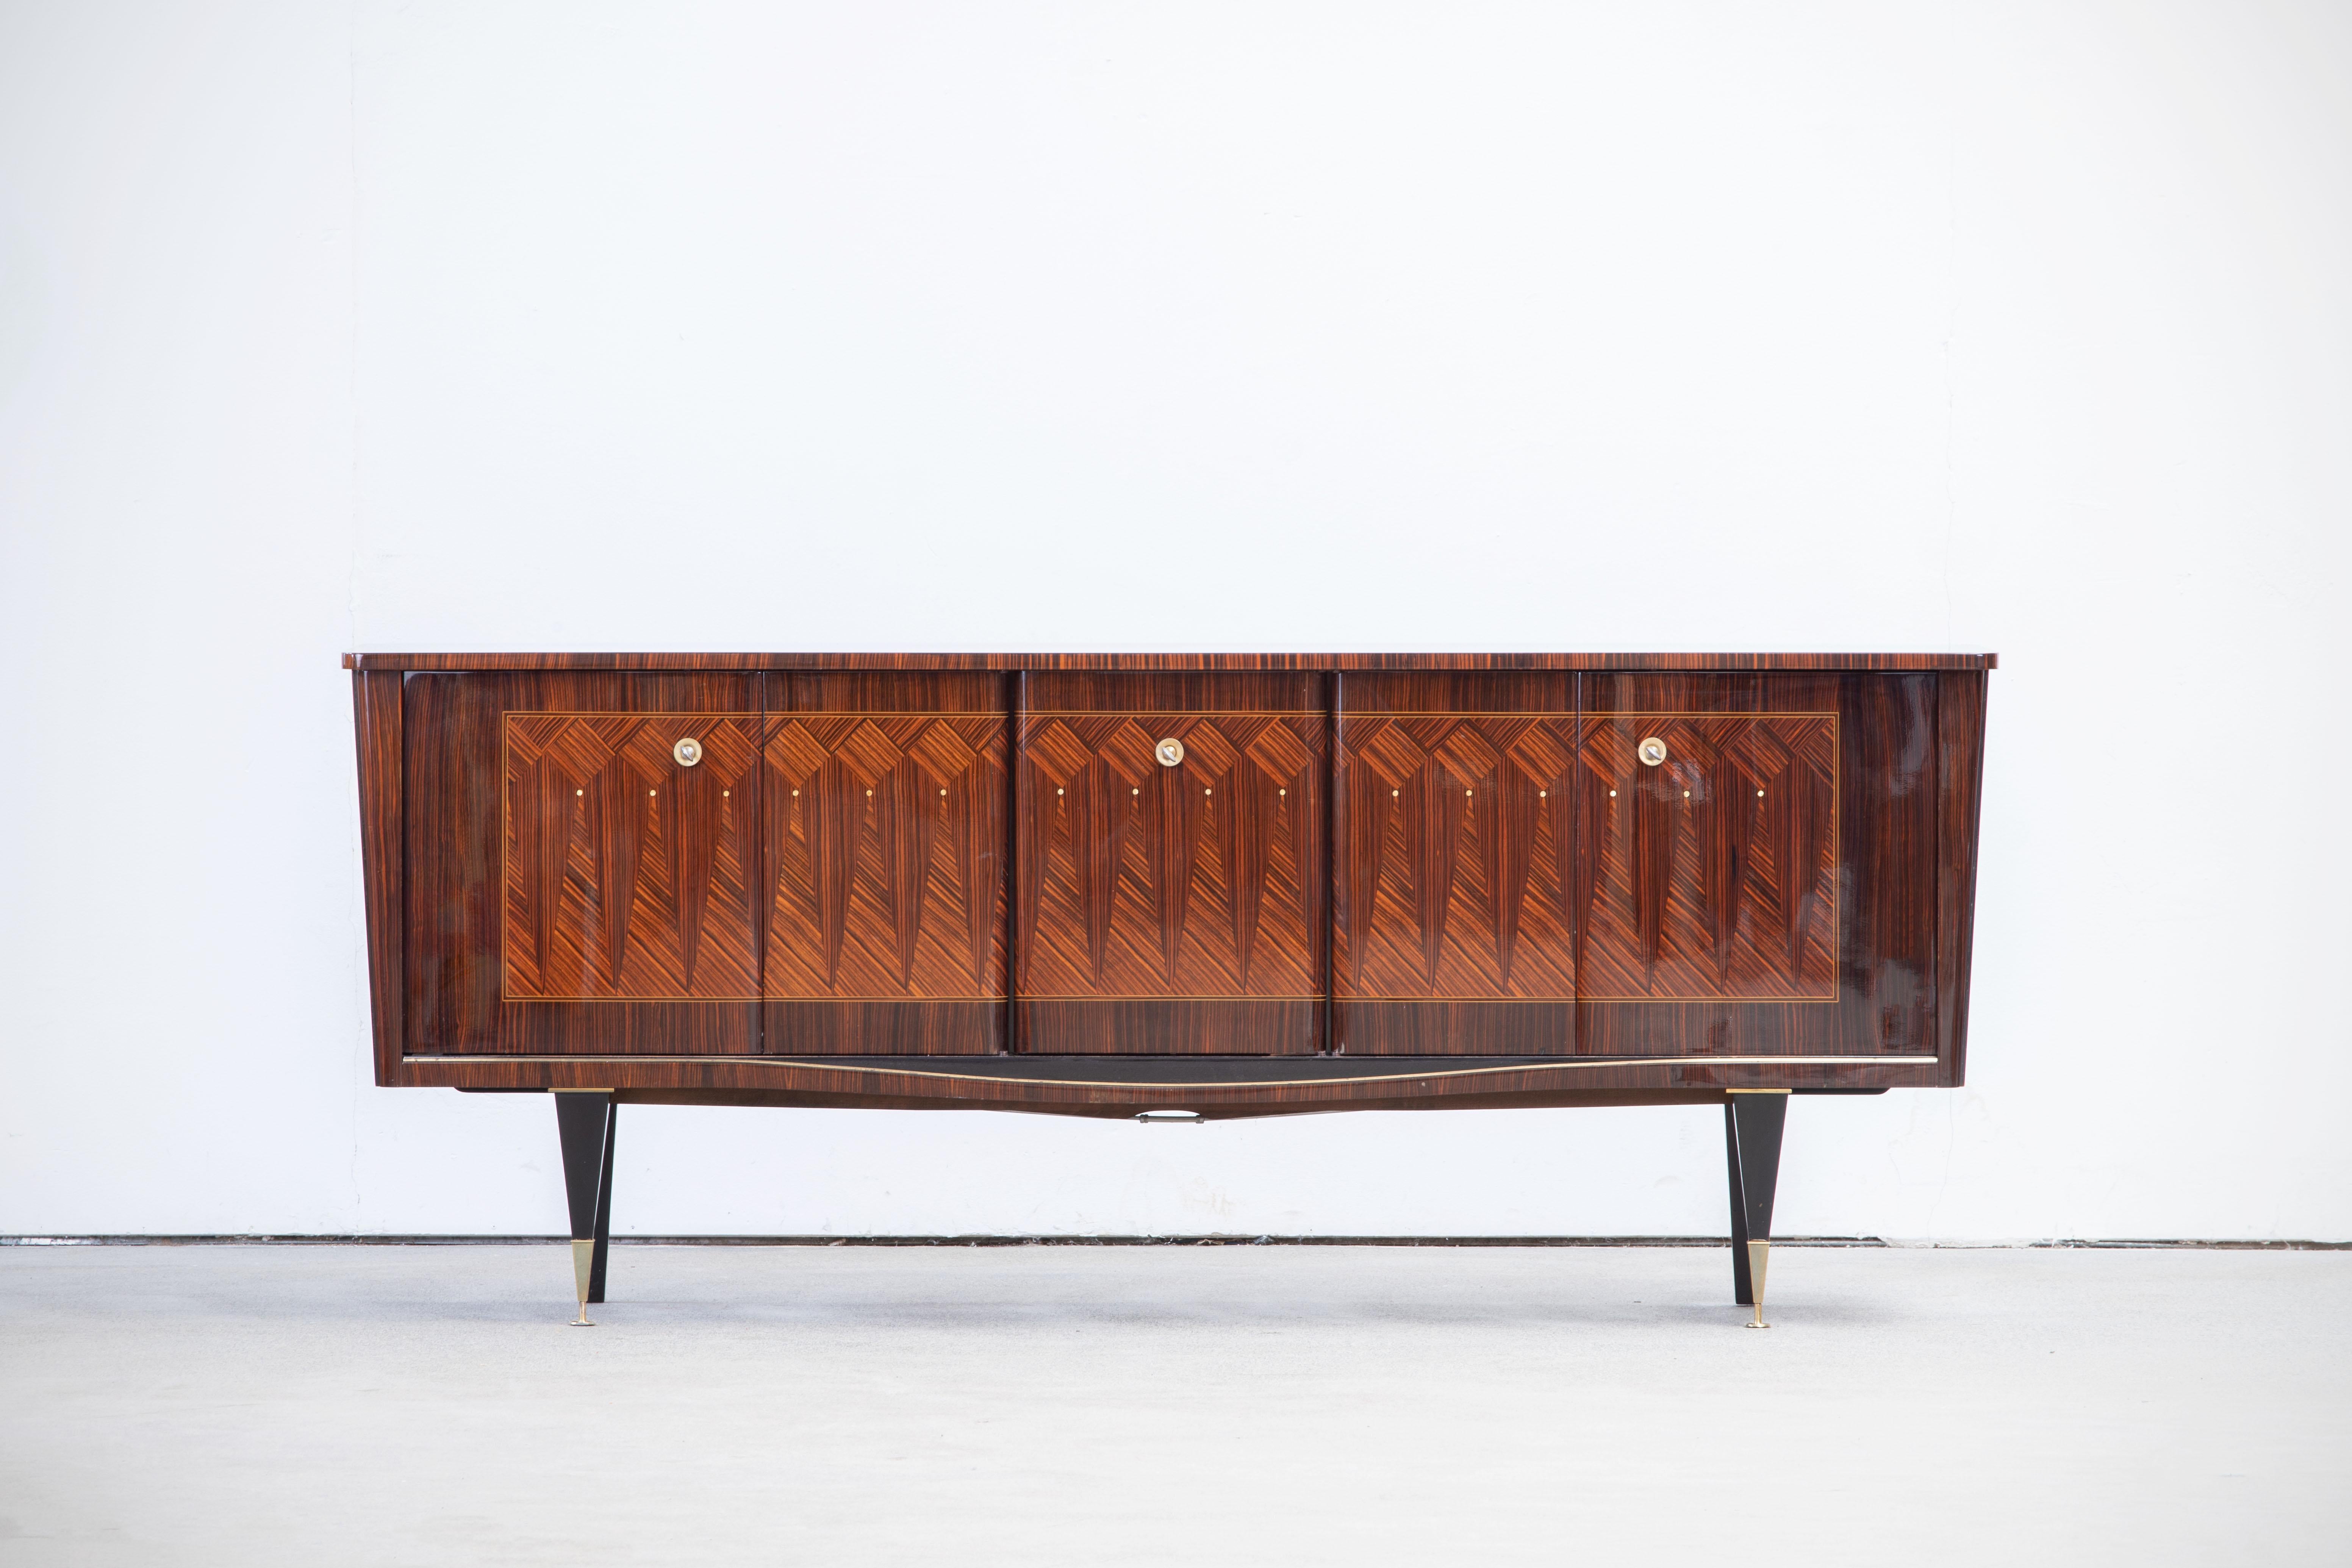 French Art Deco sideboard, credenza, with bar cabinet. The sideboard features stunning Macassar wood grain and rich pattern. It offers ample storage, with shelves and a column of drawers. The case rests on tall tapered legs. A unique blend of Art